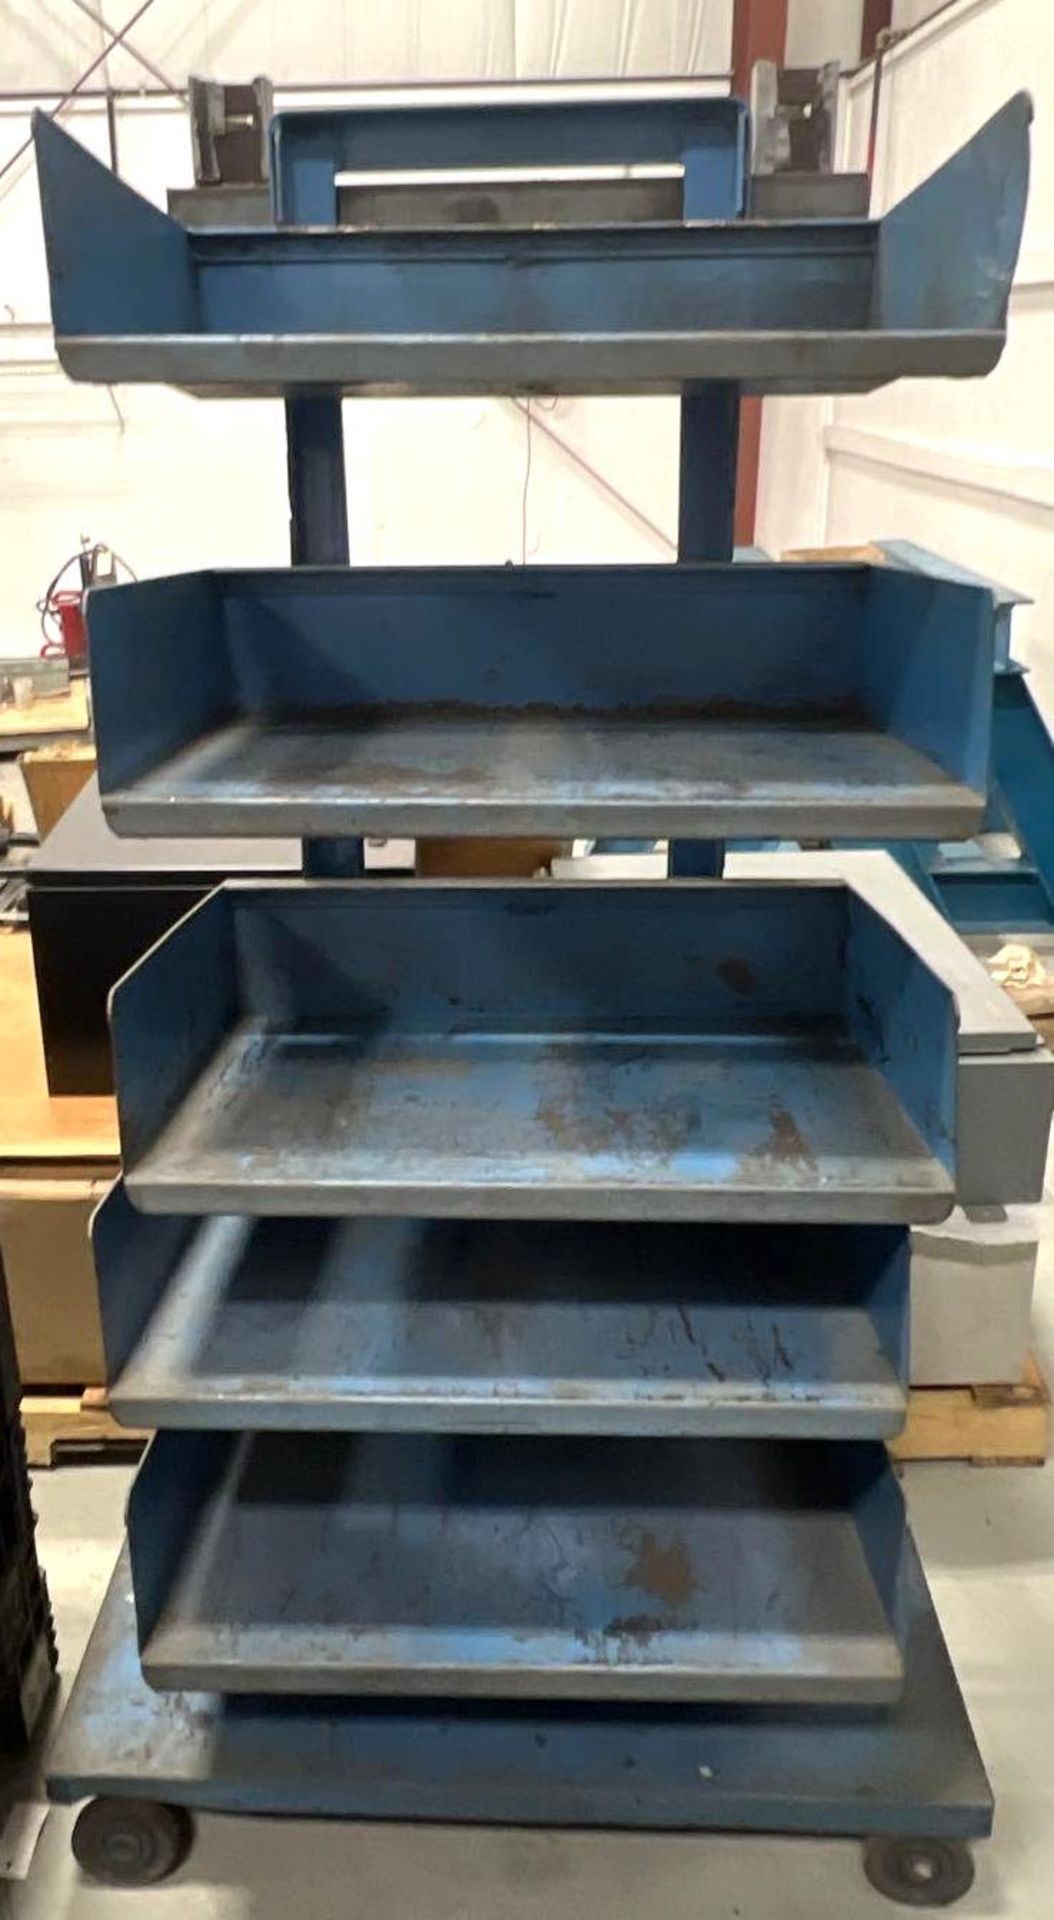 Steel Roll-a-Round Shop Storage Cart with Adjustable Trays - Image 3 of 4